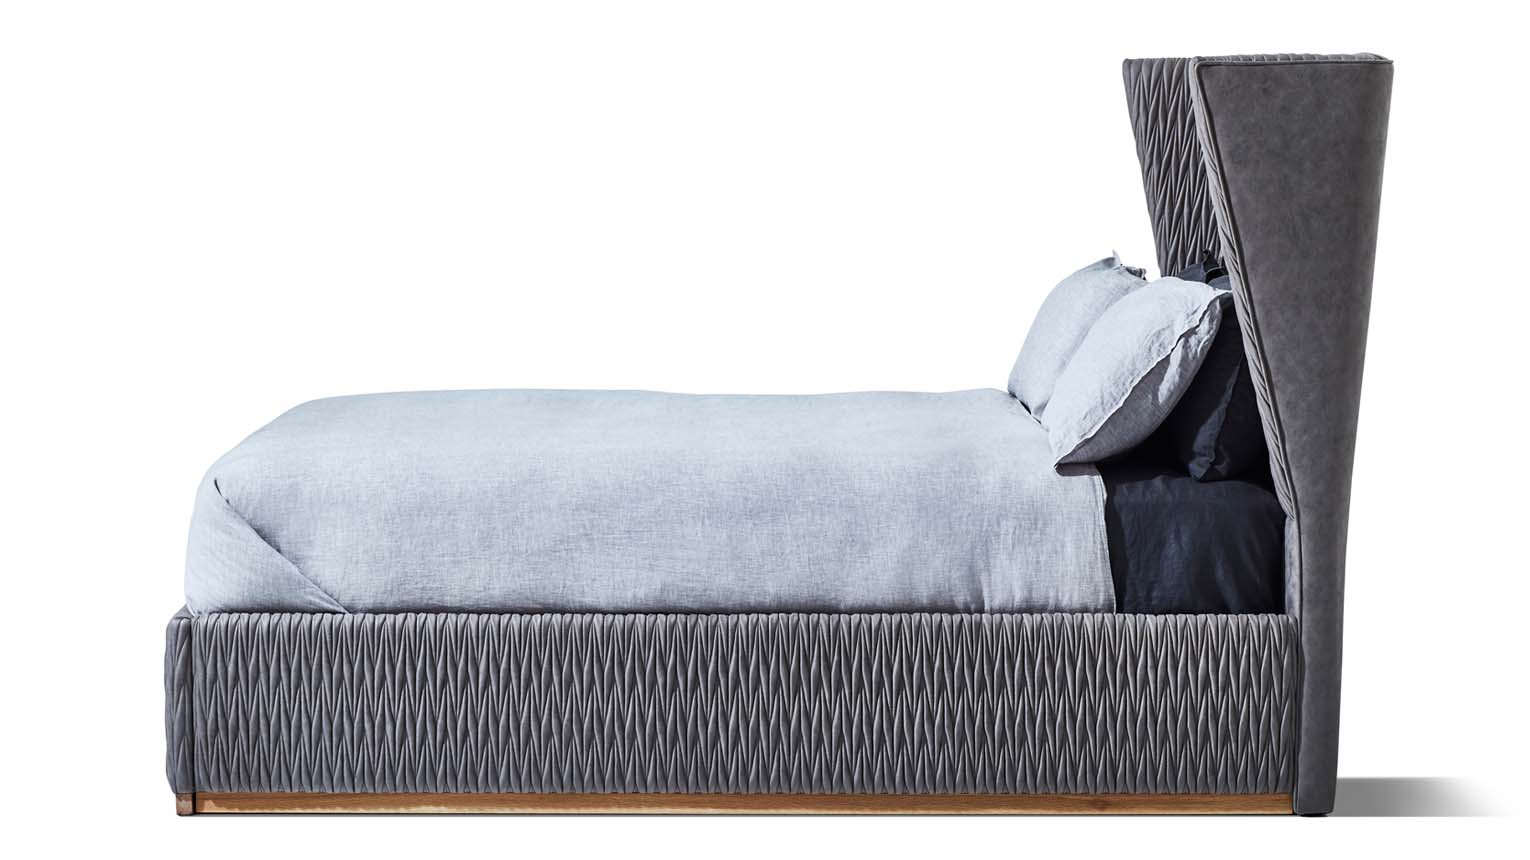 Contour Bed - Zuster Furniture